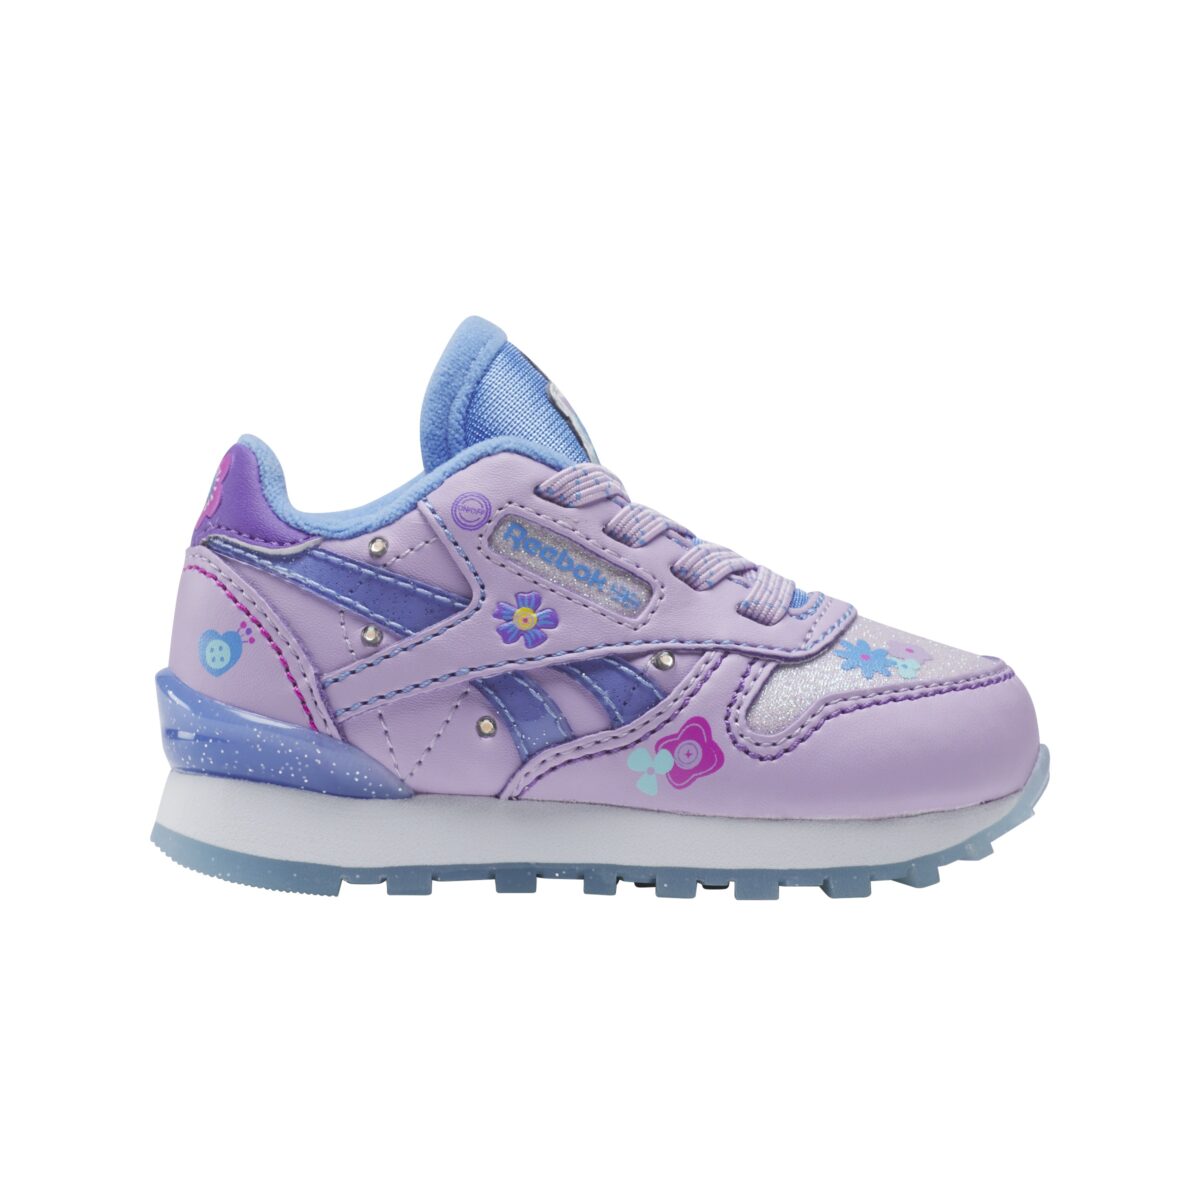 My Little Pony x reebok Woven Classic Leather Collection